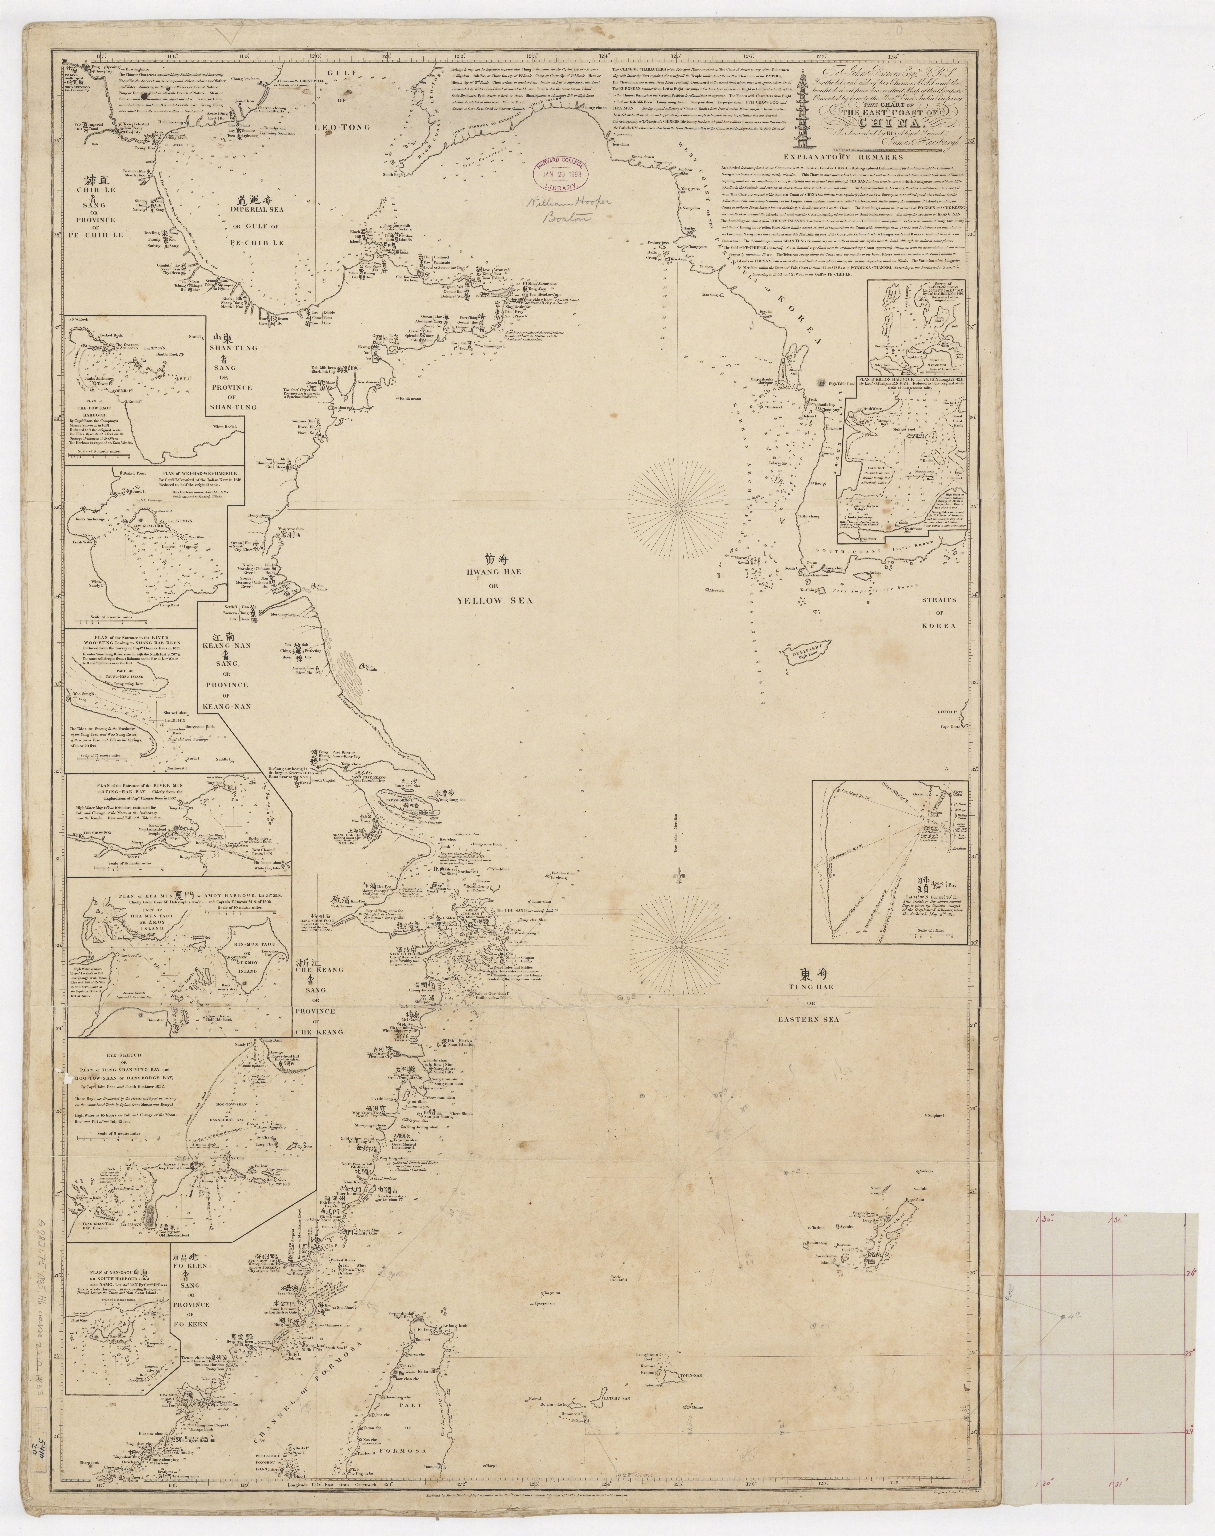 To John Reeves Esq.re F.R.S. for the liberal aid of his Chinese m.s.s. and the benefit derived from his excellent map of that Empire presented by him to the Hon.ble East India Company this Chart of the East Coast of China